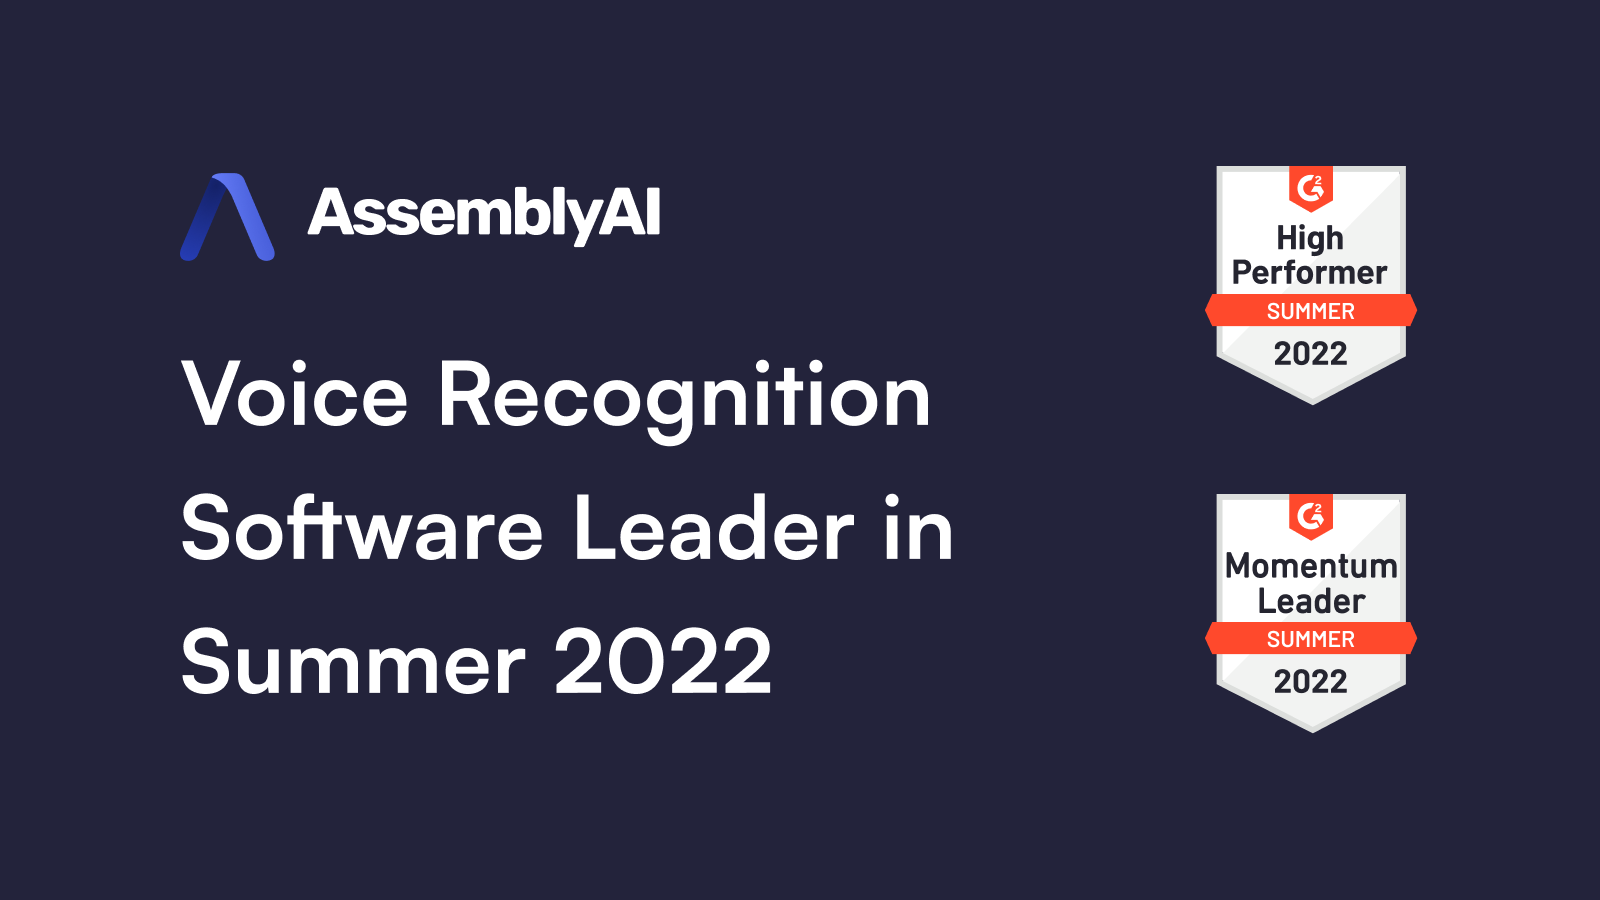 AssemblyAI Named a G2 High Performer and Momentum Leader for Summer 2022